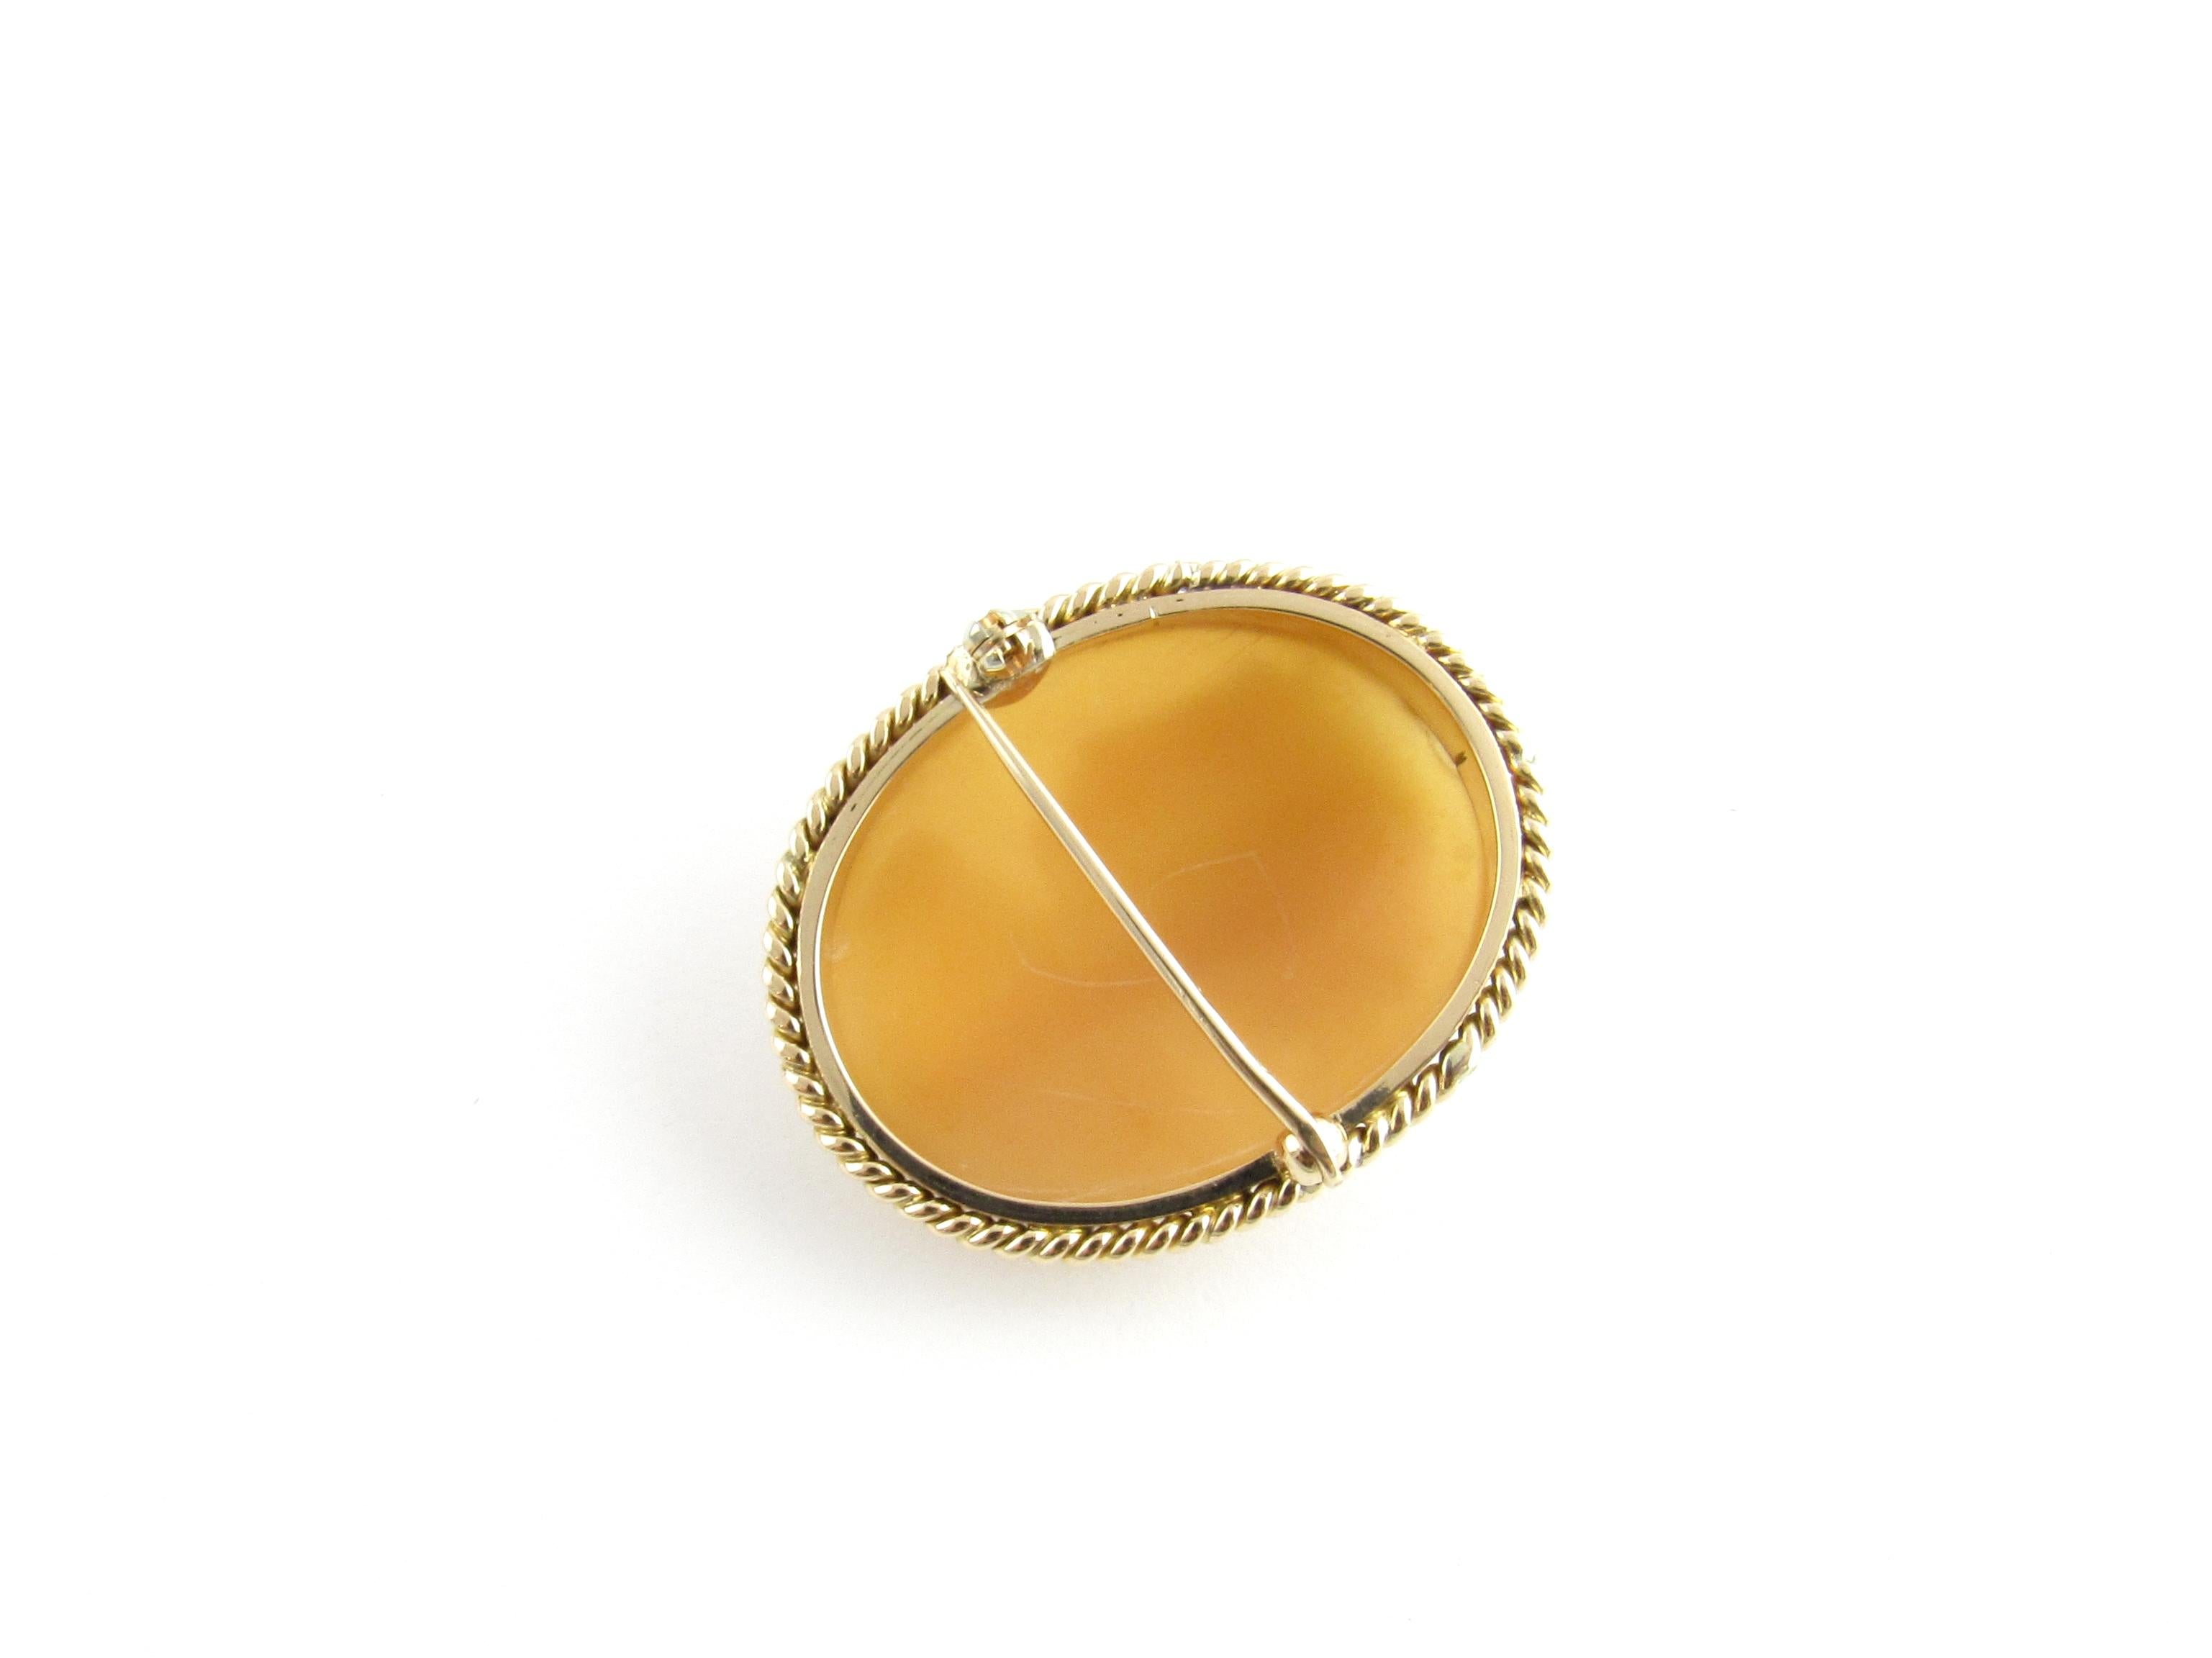 10 Karat Yellow Gold Cameo Brooch For Sale 3